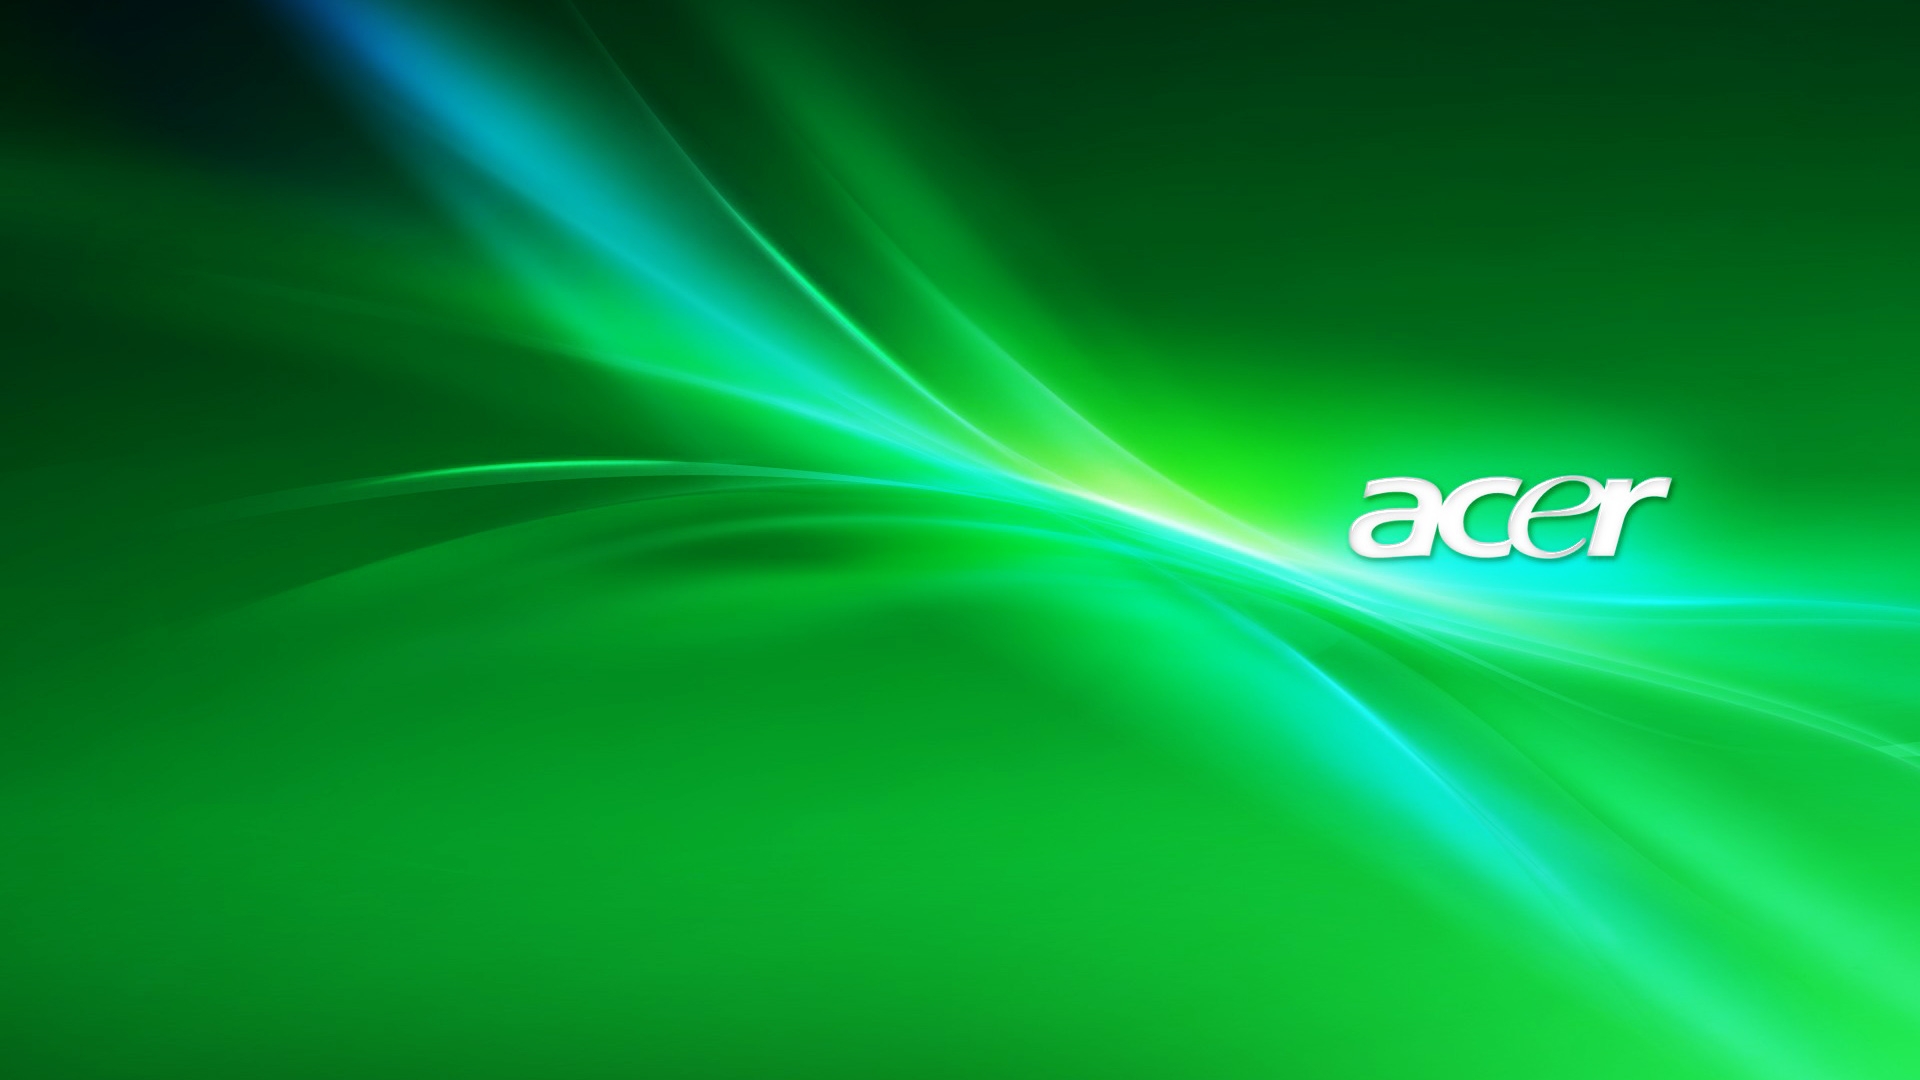 Acer Laptop Windows And Theme All For